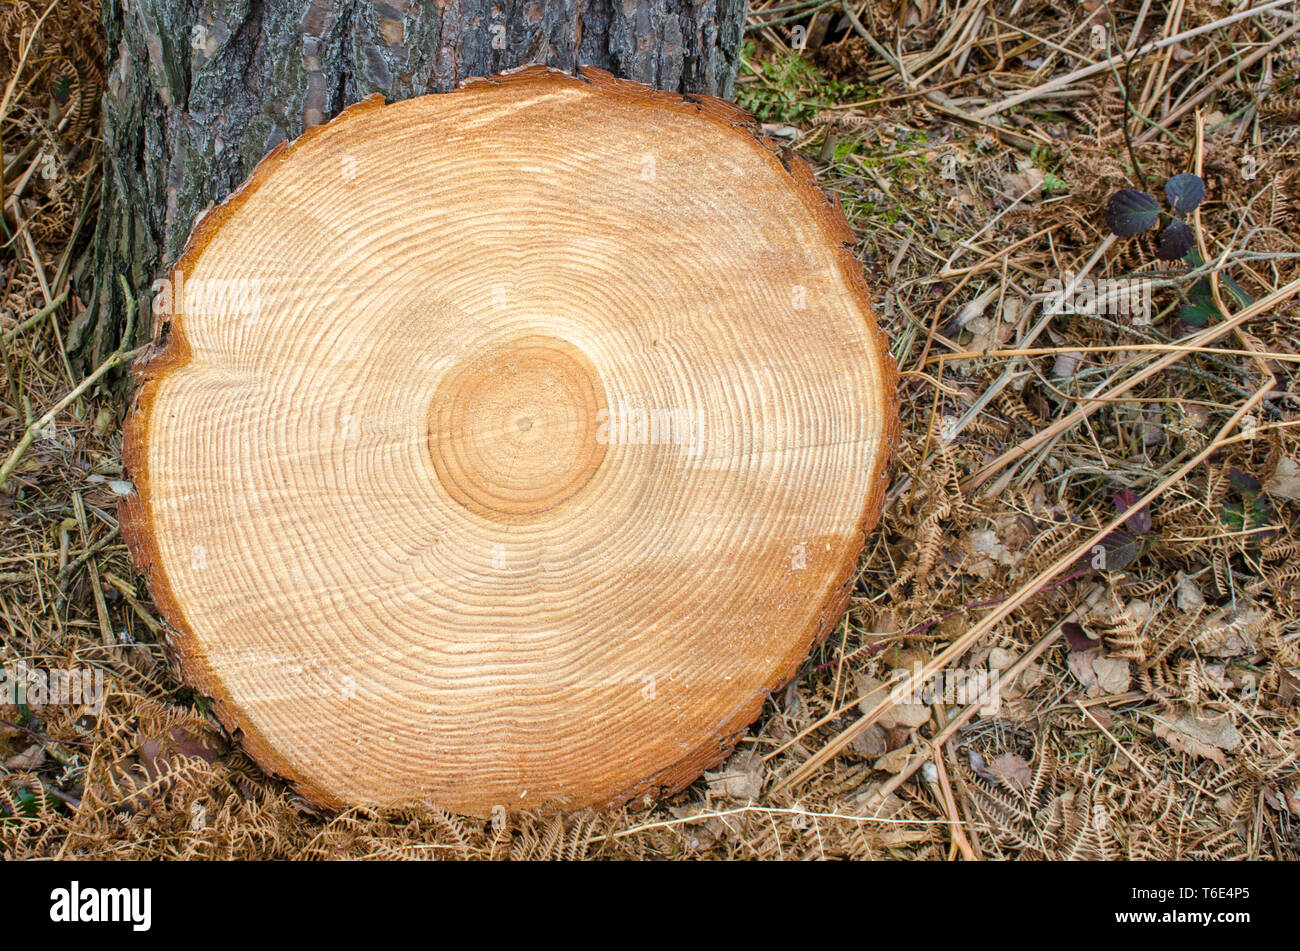 Felled Piece Wood Tree Trunk Growth Rings Isolated White Natural Stock  Photo by ©captureandcompose 407897794